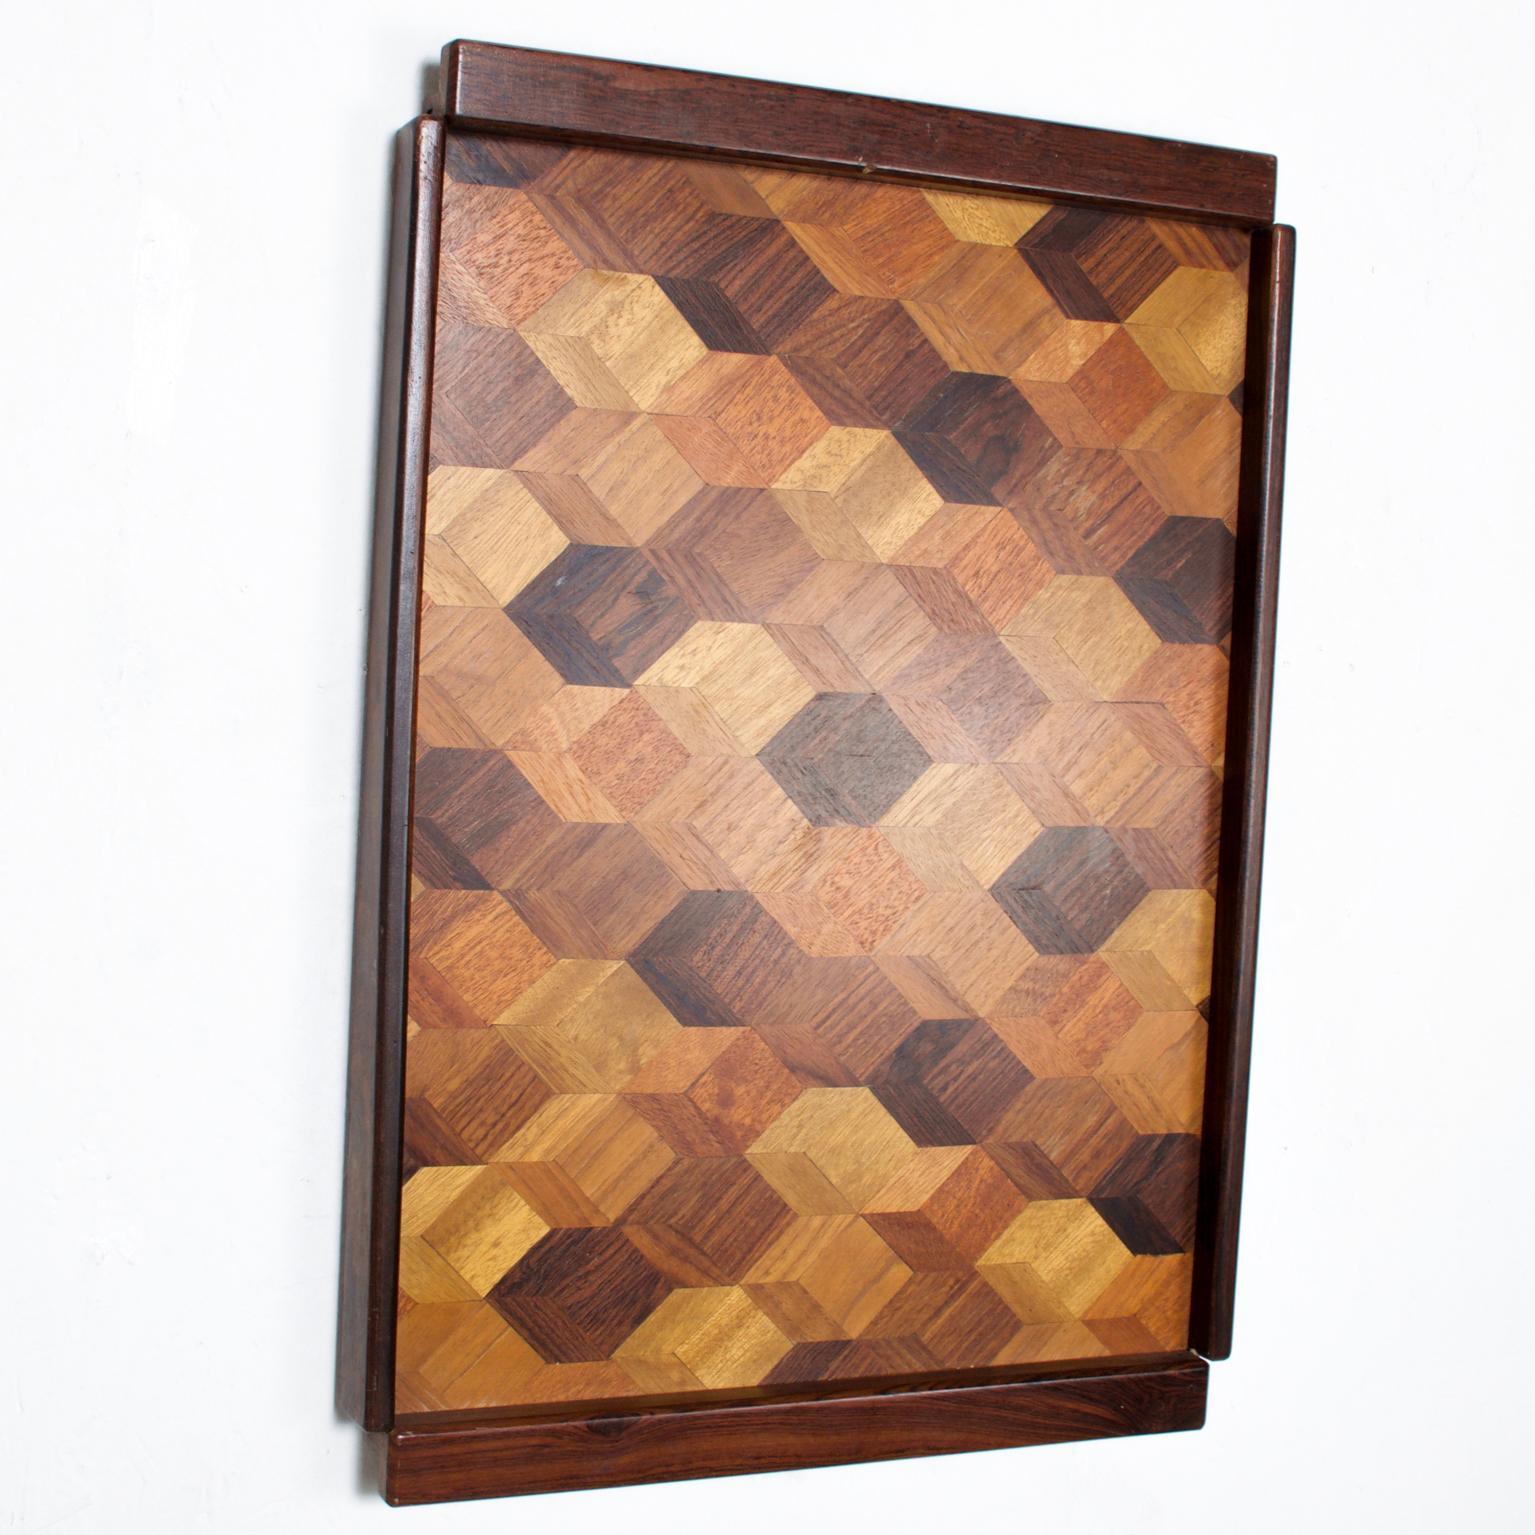 We are pleased to offer for your consideration a Large service tray by Don S Shoemaker. Beautiful geometric woodwork with exotic woods. A small hole on the back of the tray allows easy hanging into the wall. Retains label from the maker on the back.